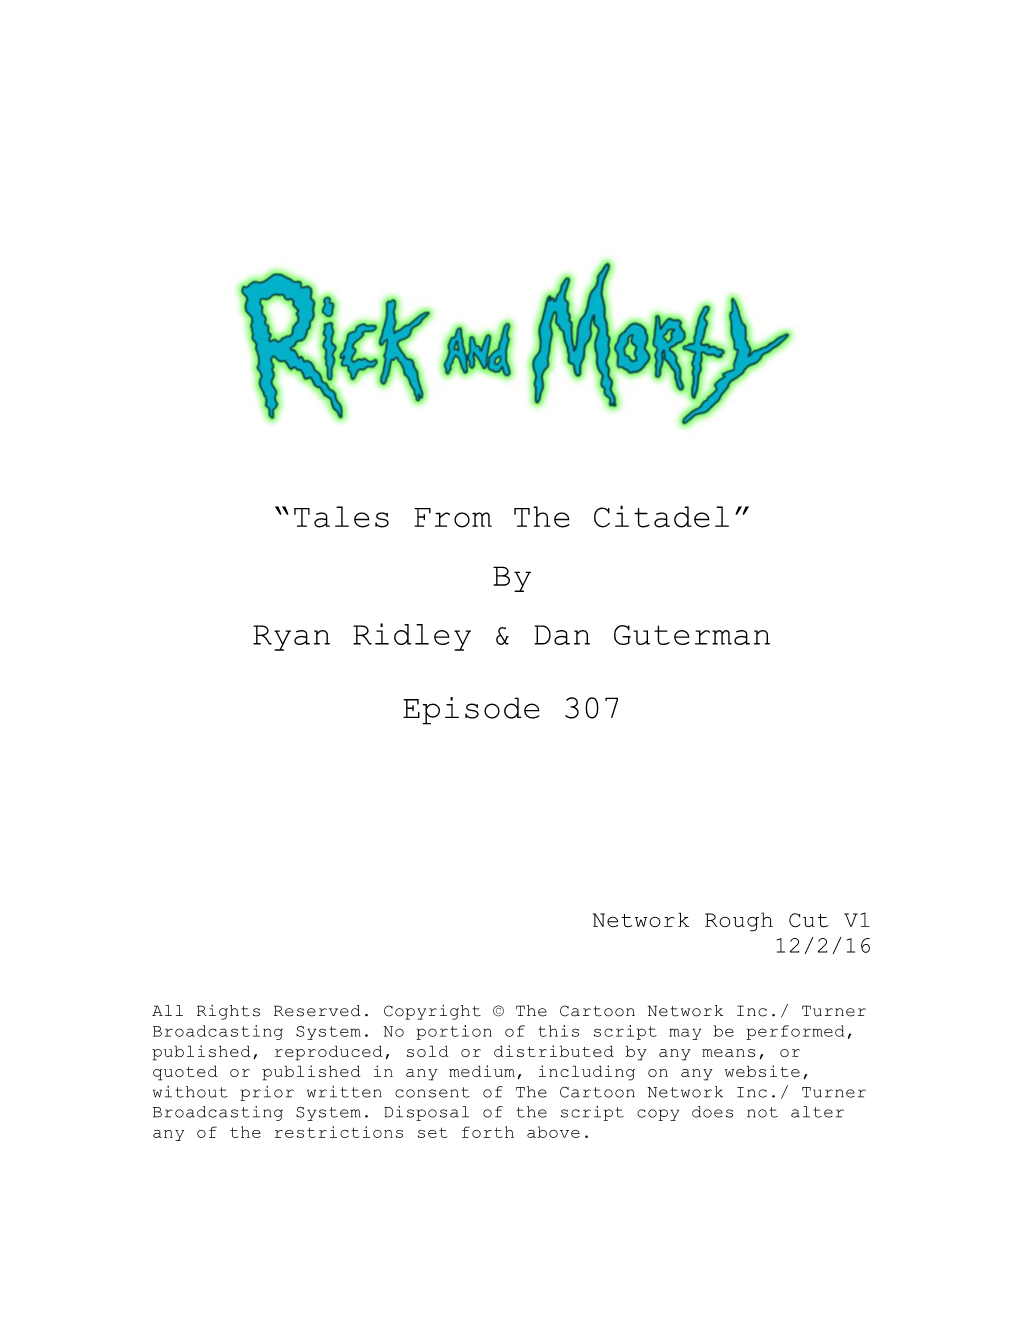 “Tales from the Citadel” by Ryan Ridley & Dan Guterman Episode